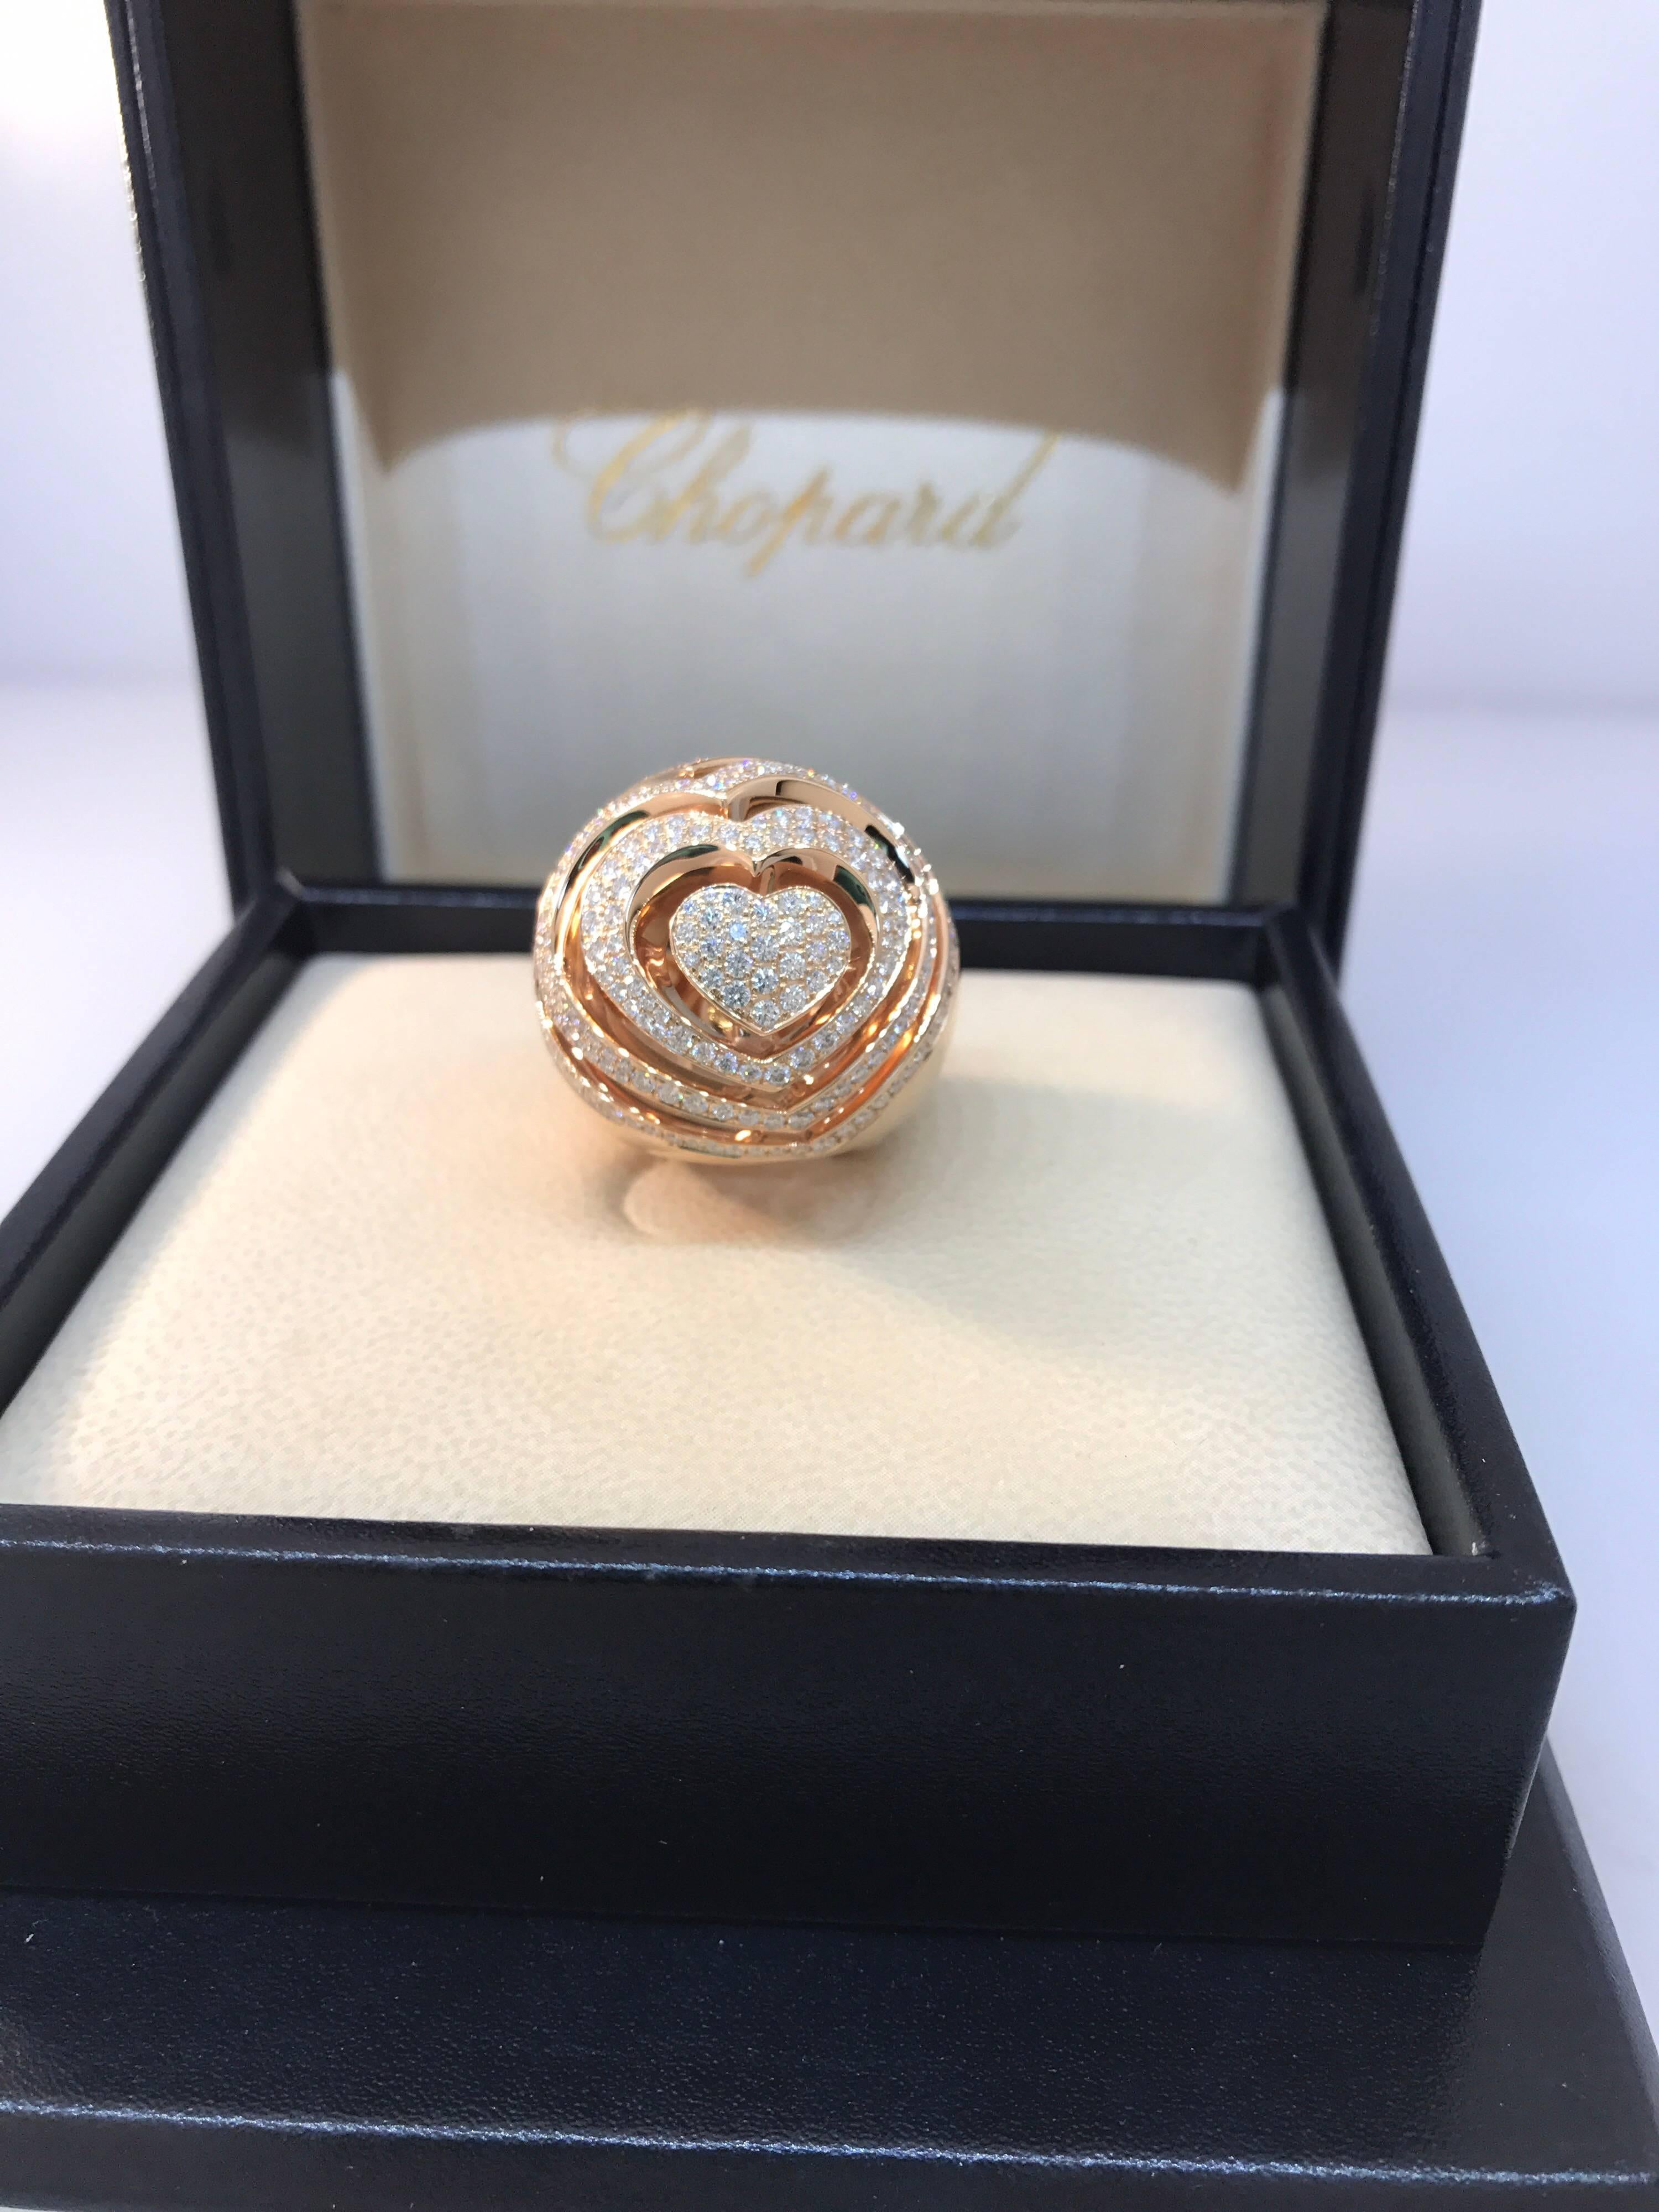 Chopard Xtravaganza Rose Gold Diamond Large Heart Dome Ring  82/7215 In New Condition For Sale In New York, NY